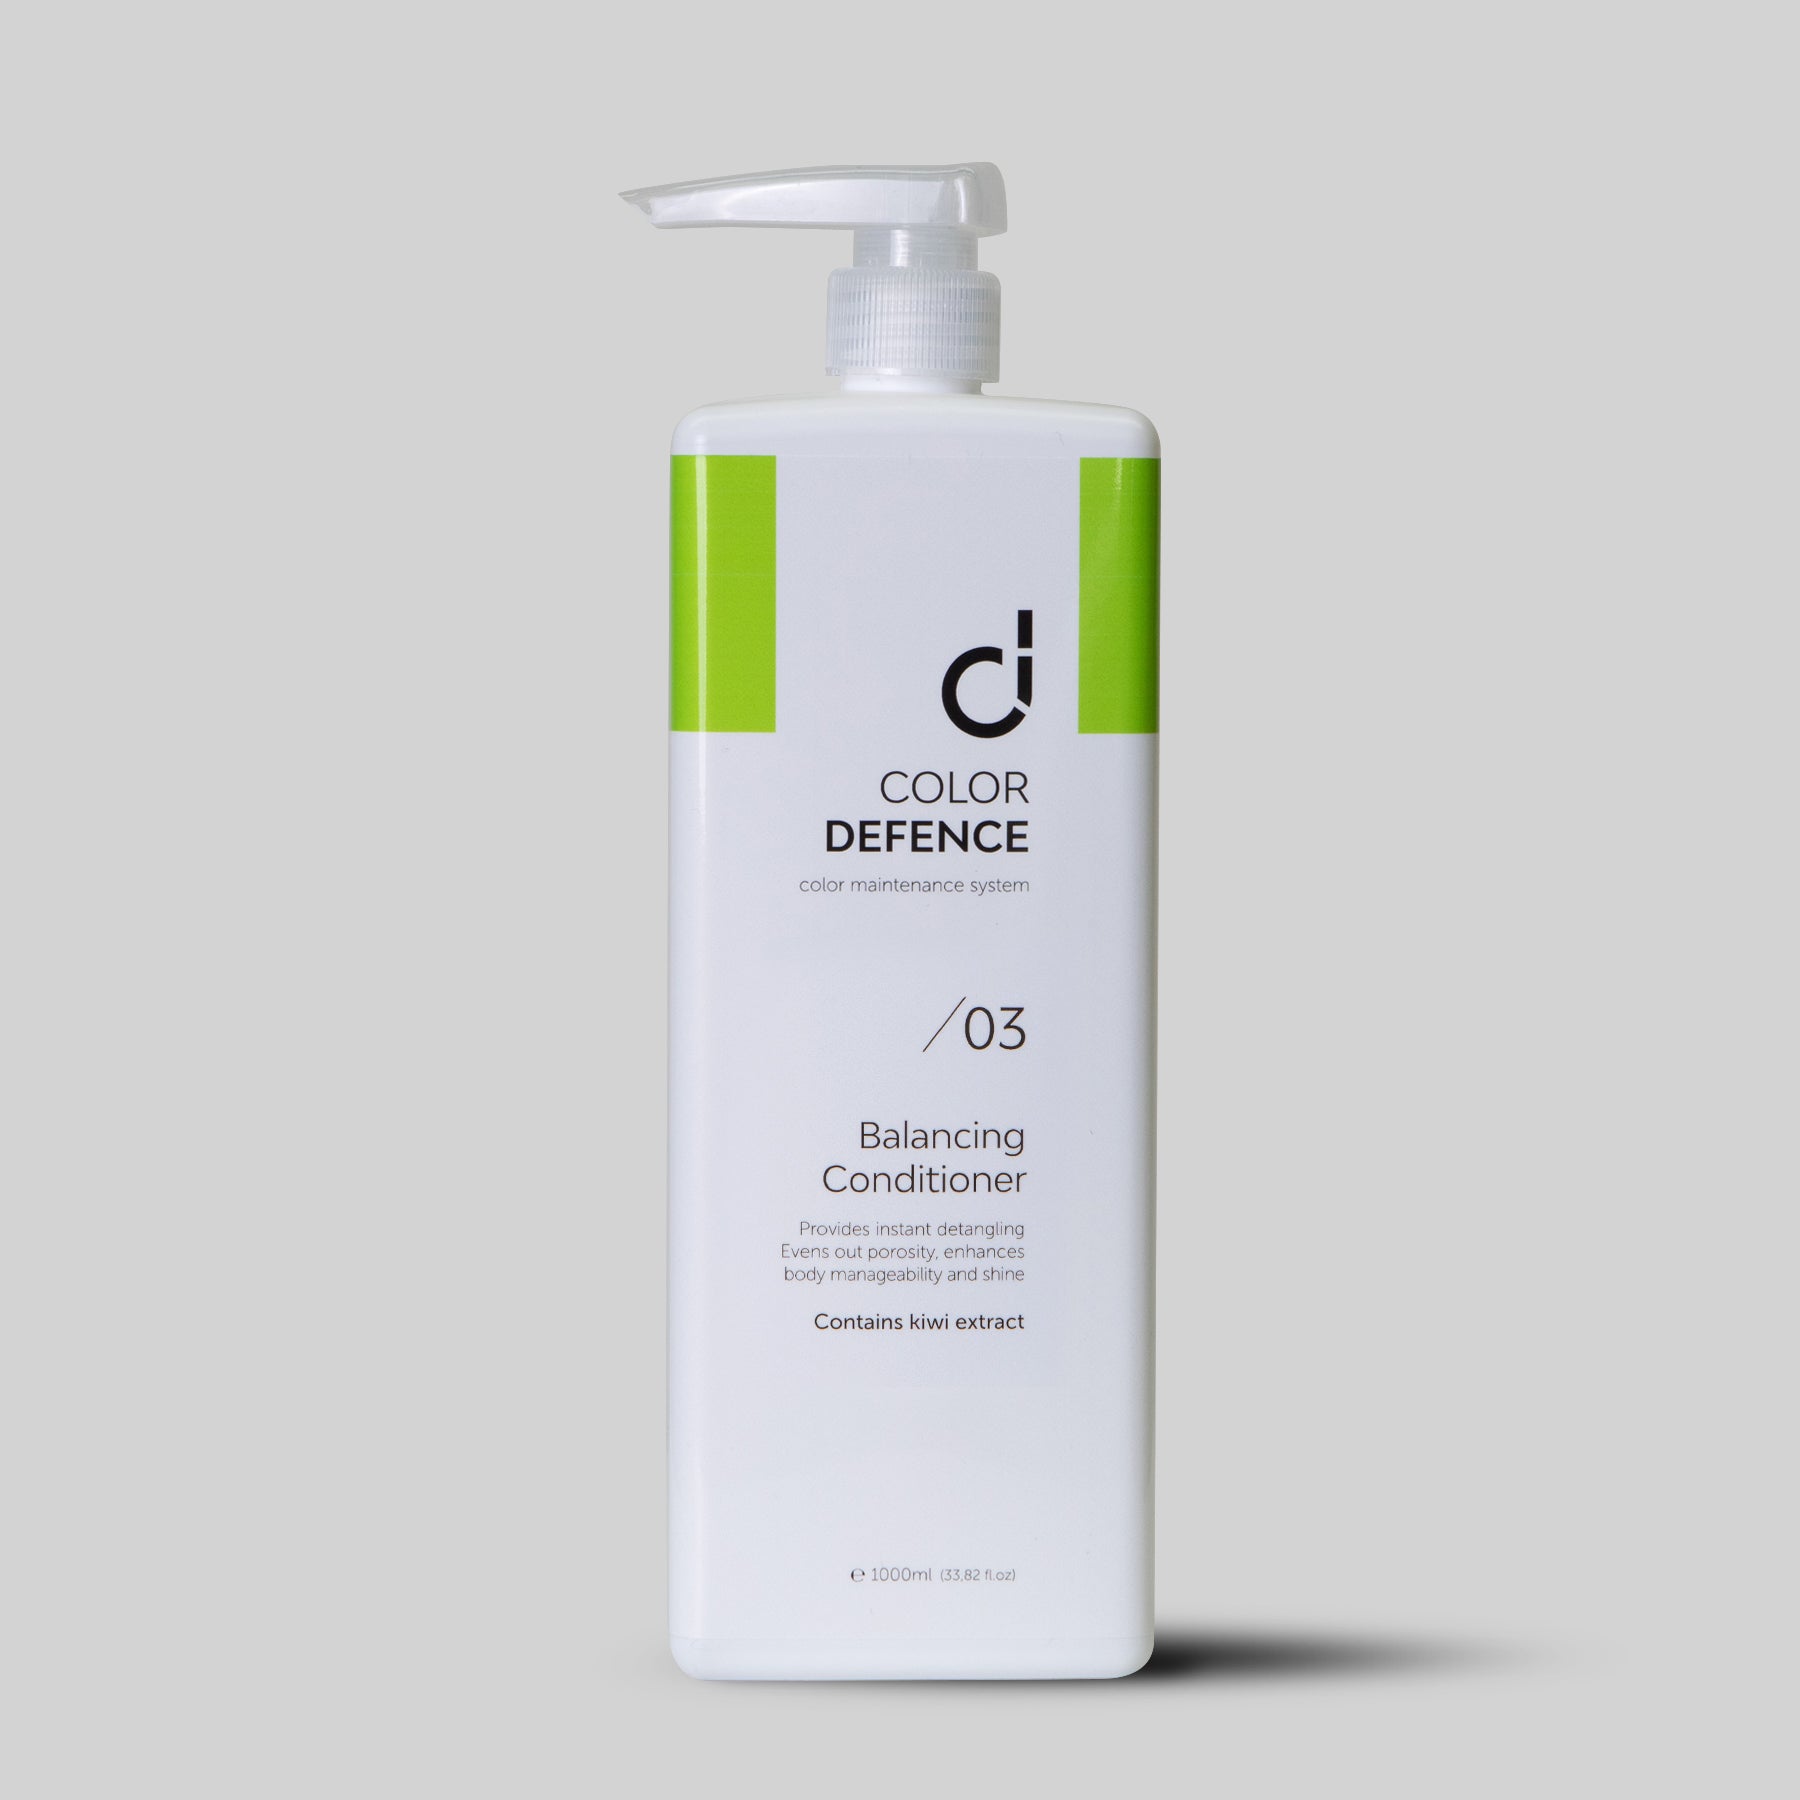 Colour Defence Balancing Conditioner – Step 3 Lightweight, botanical conditioner for coloured & natural hair, provides Instant detangling, body & shine. restores ph balance of hair, improves porosity. 3-defence complex system™ reduces oxidation, protects from free radicals and environmental damage. Can be used daily.1234